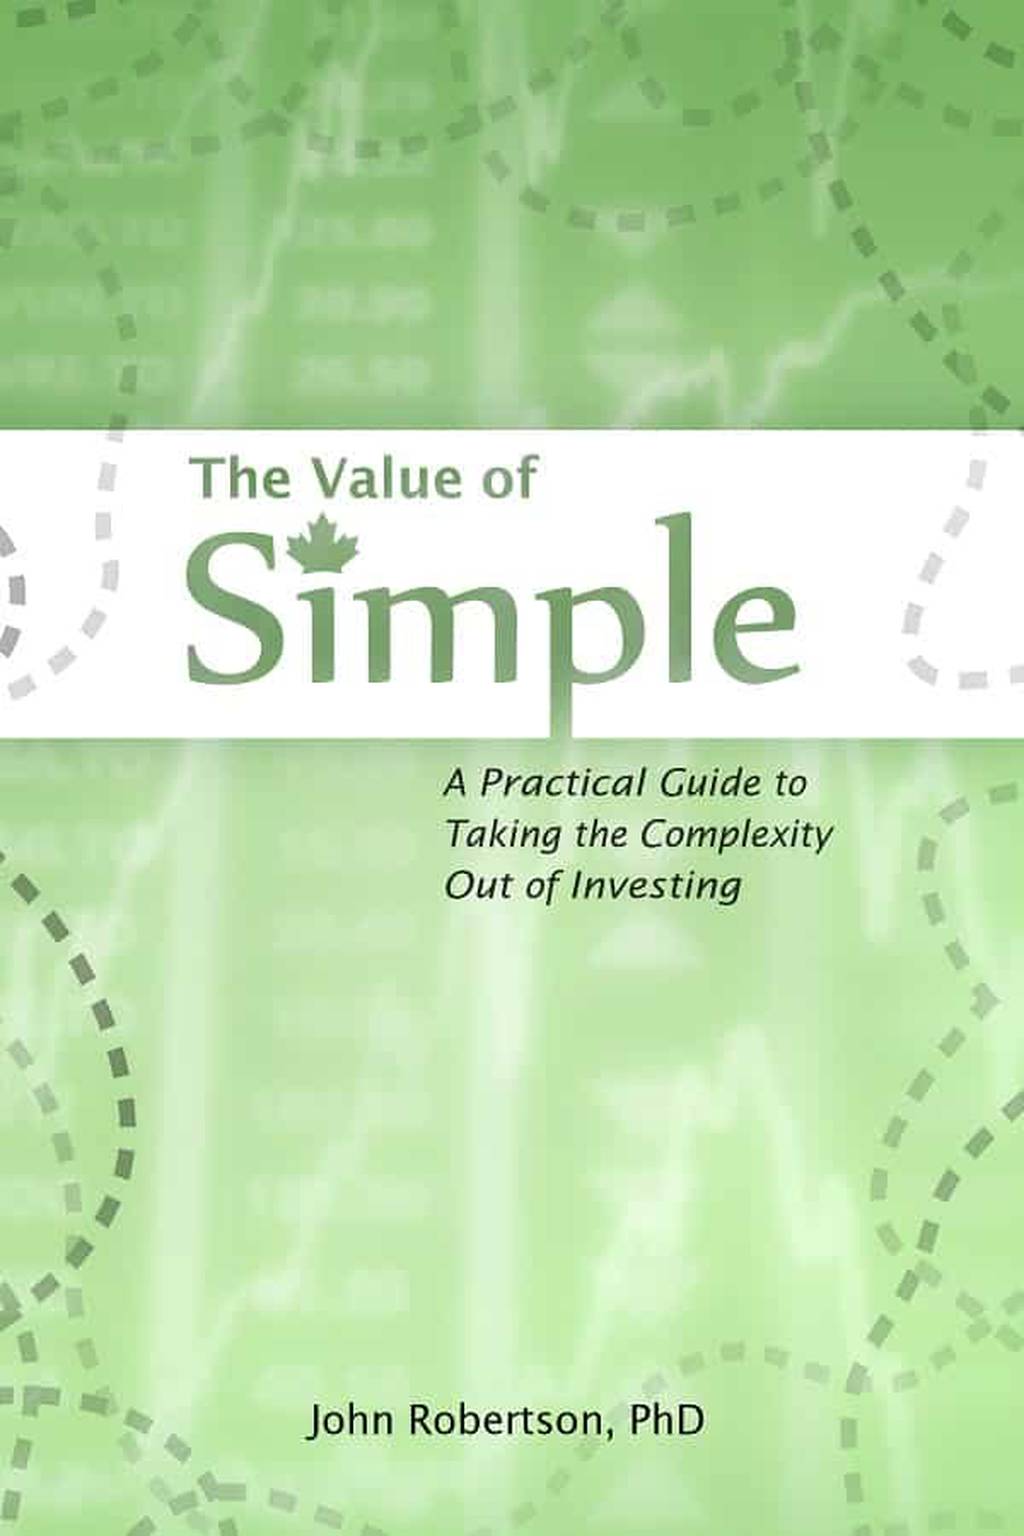 The Value of Simple